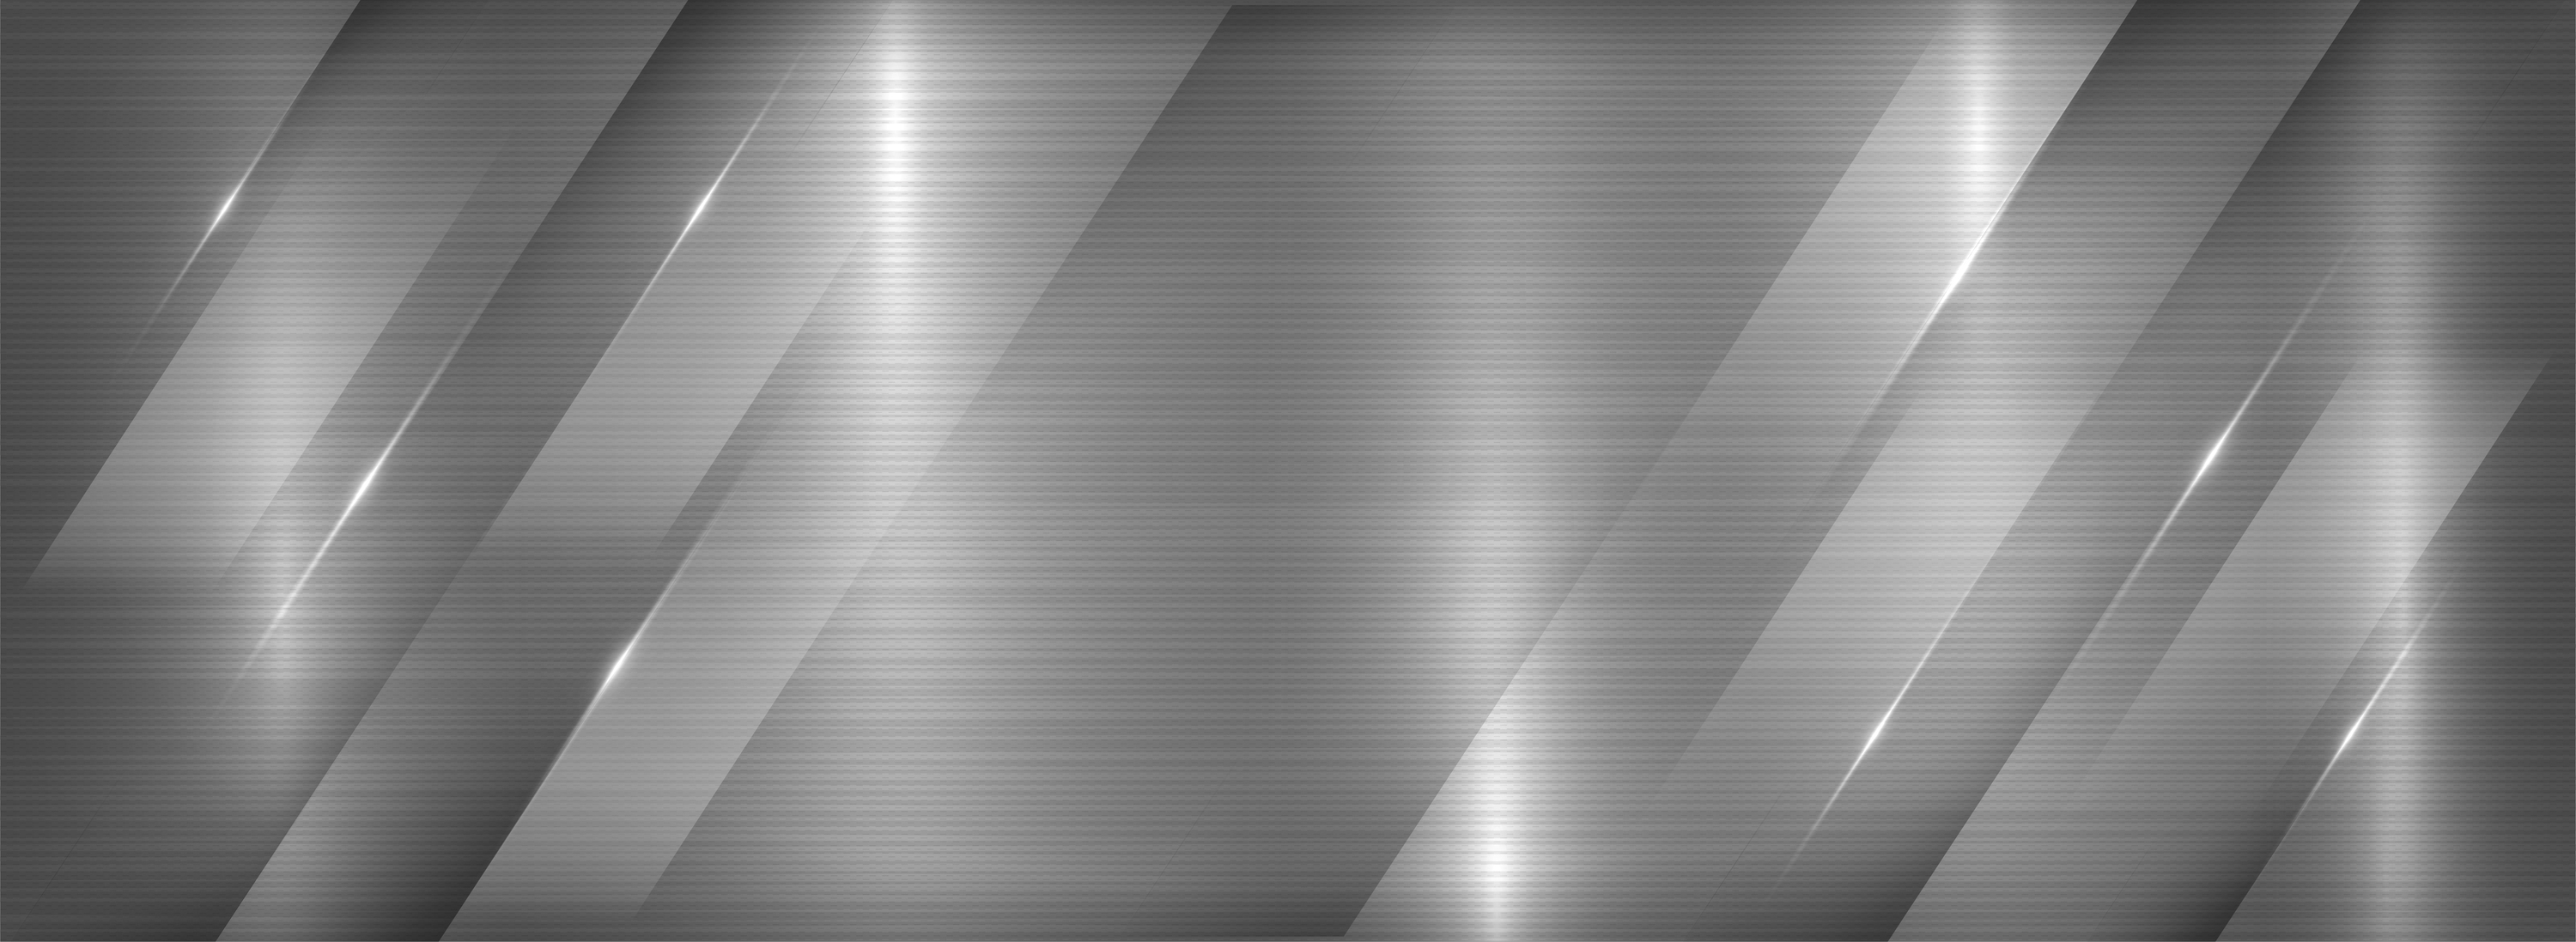 Abstract Brush Metallic Background With Shinny Lines Combination